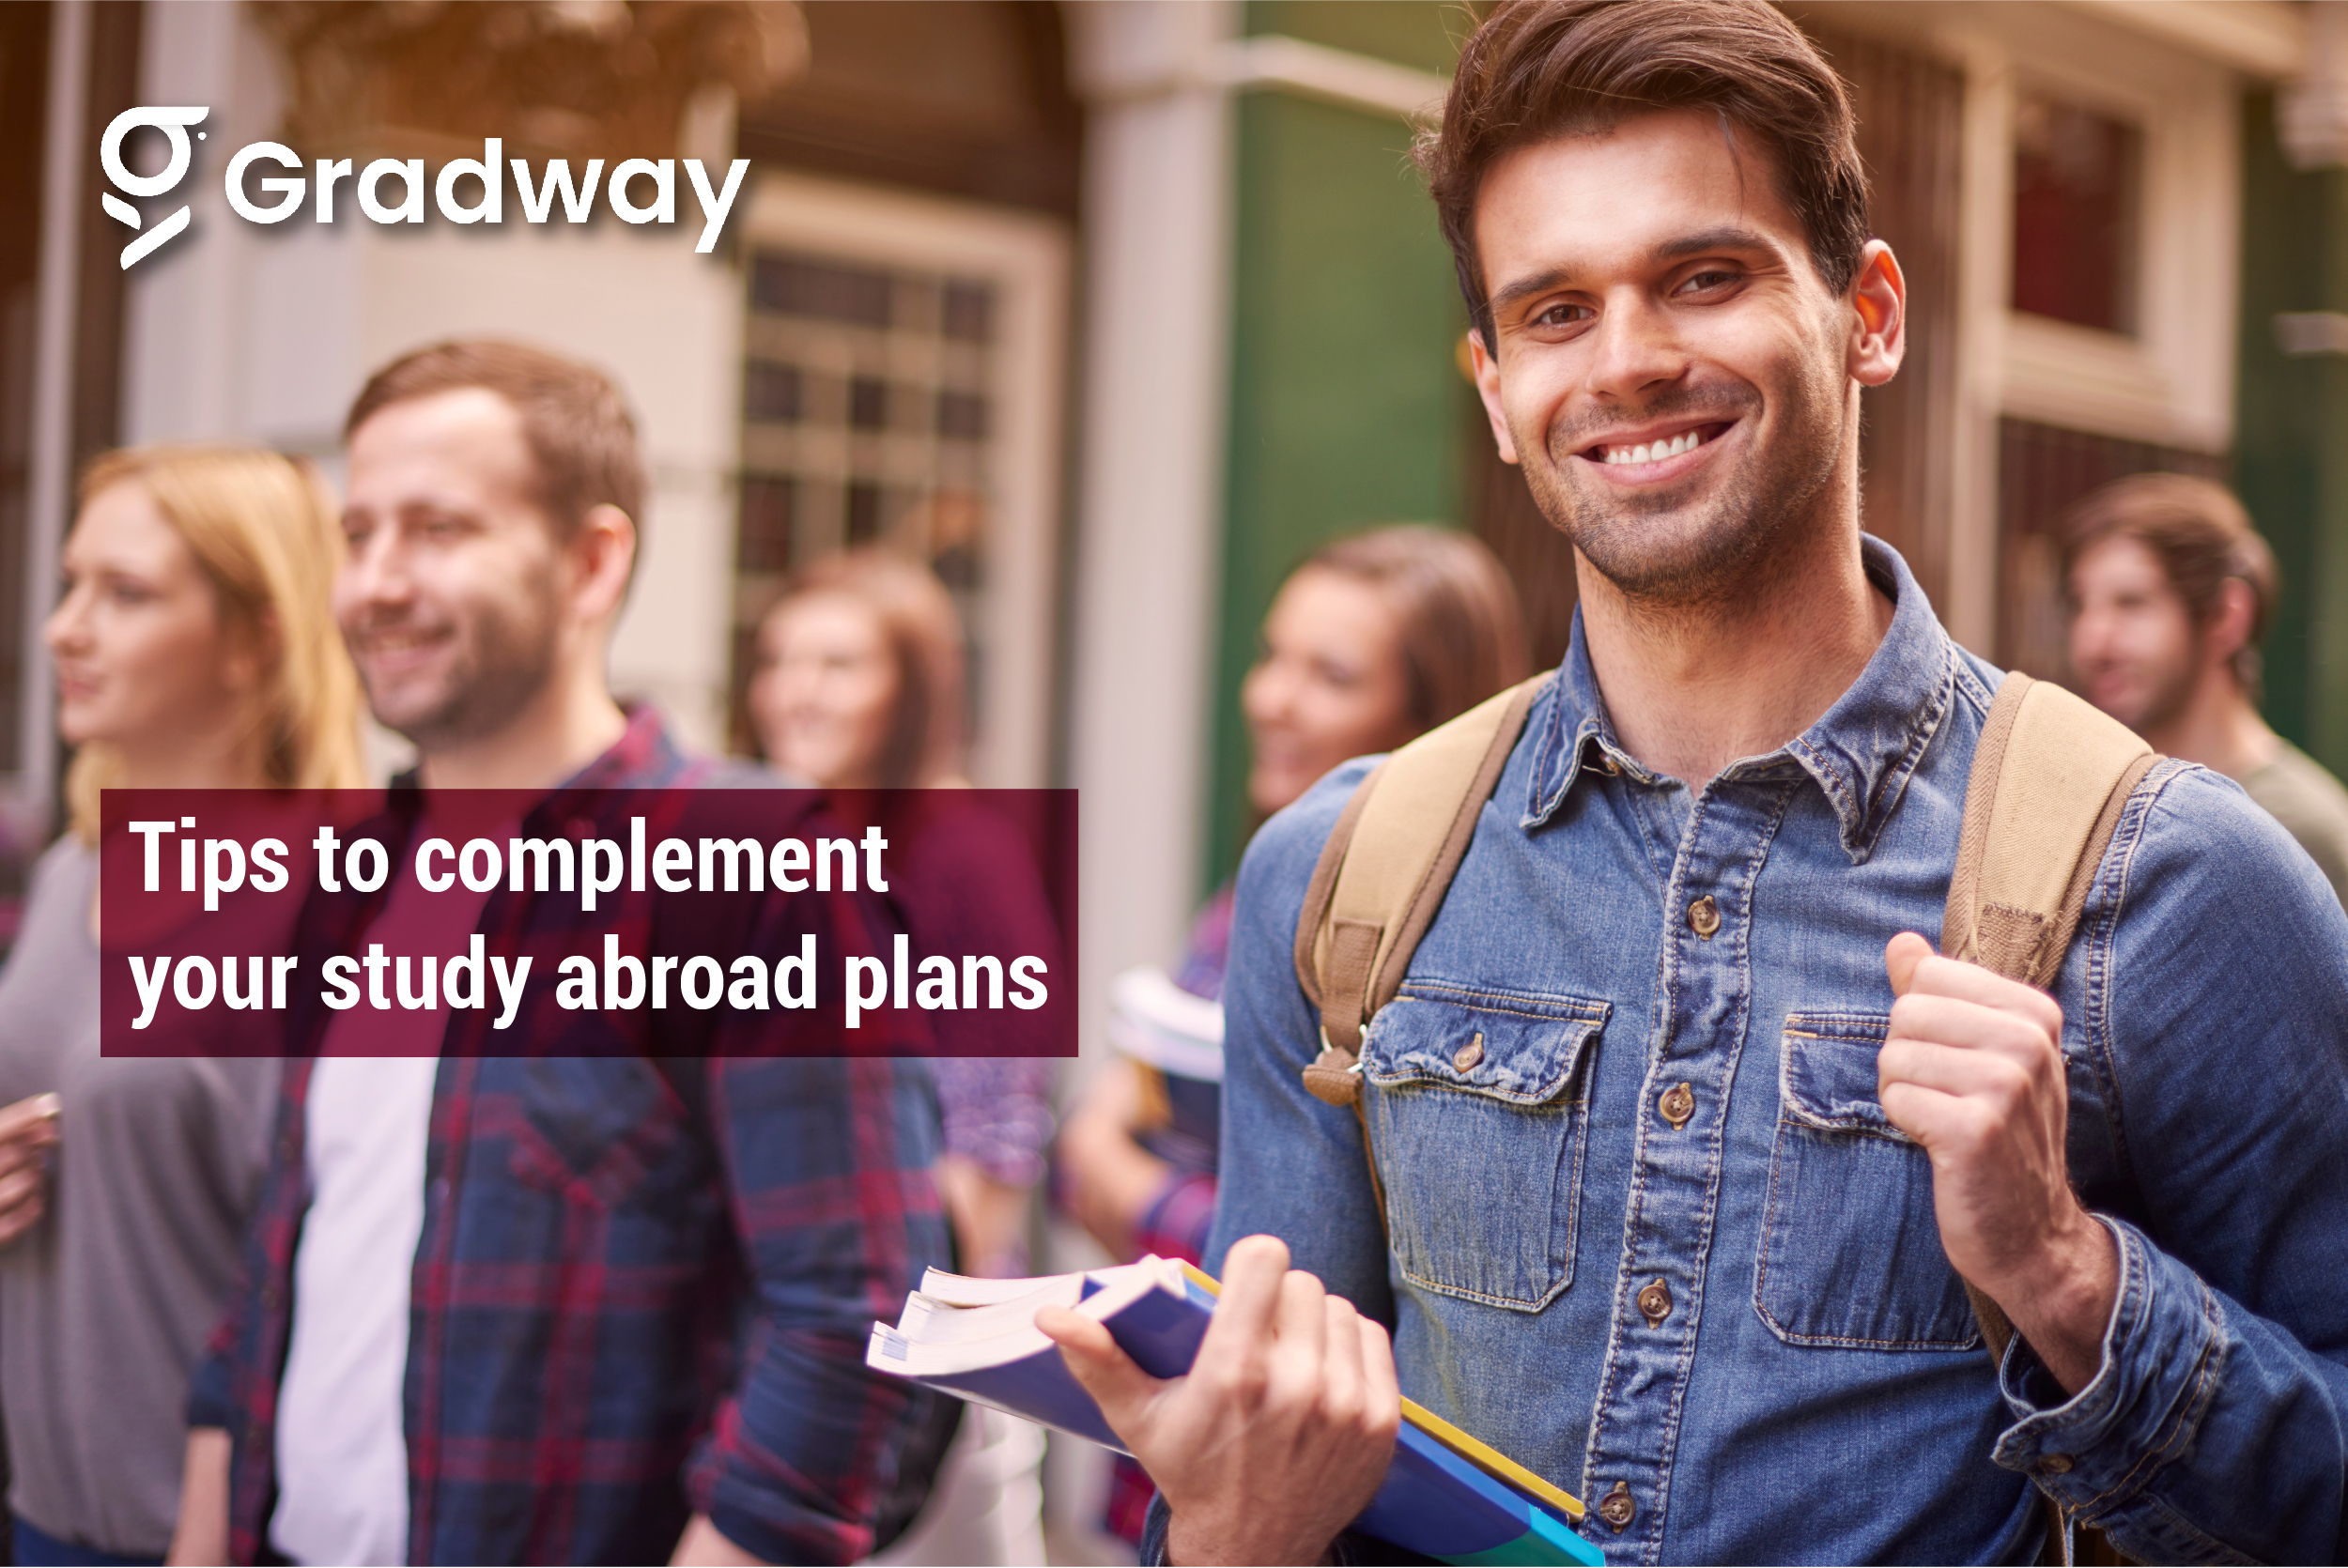 Tips to complement your study abroad plans | Gradway